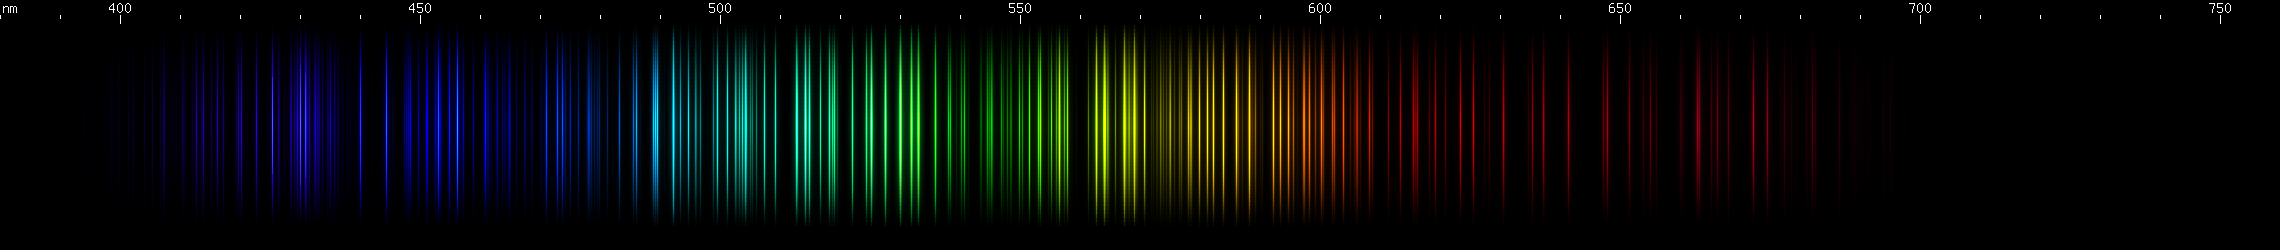 Spectral lines of Holmium.